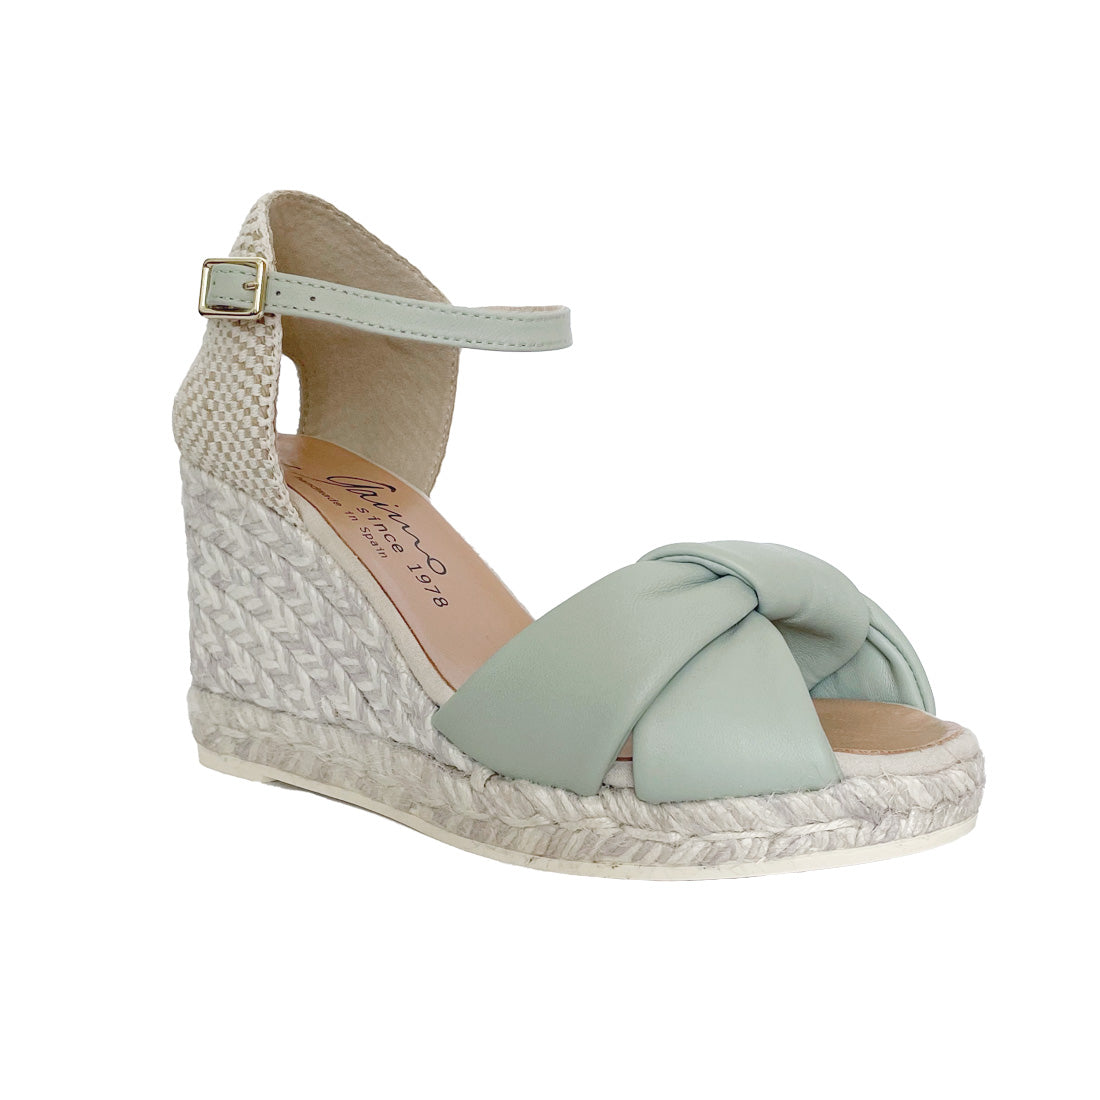 wedges sandals handmade in spain with the smoothest leather in light green and anklet buckle in light green colour